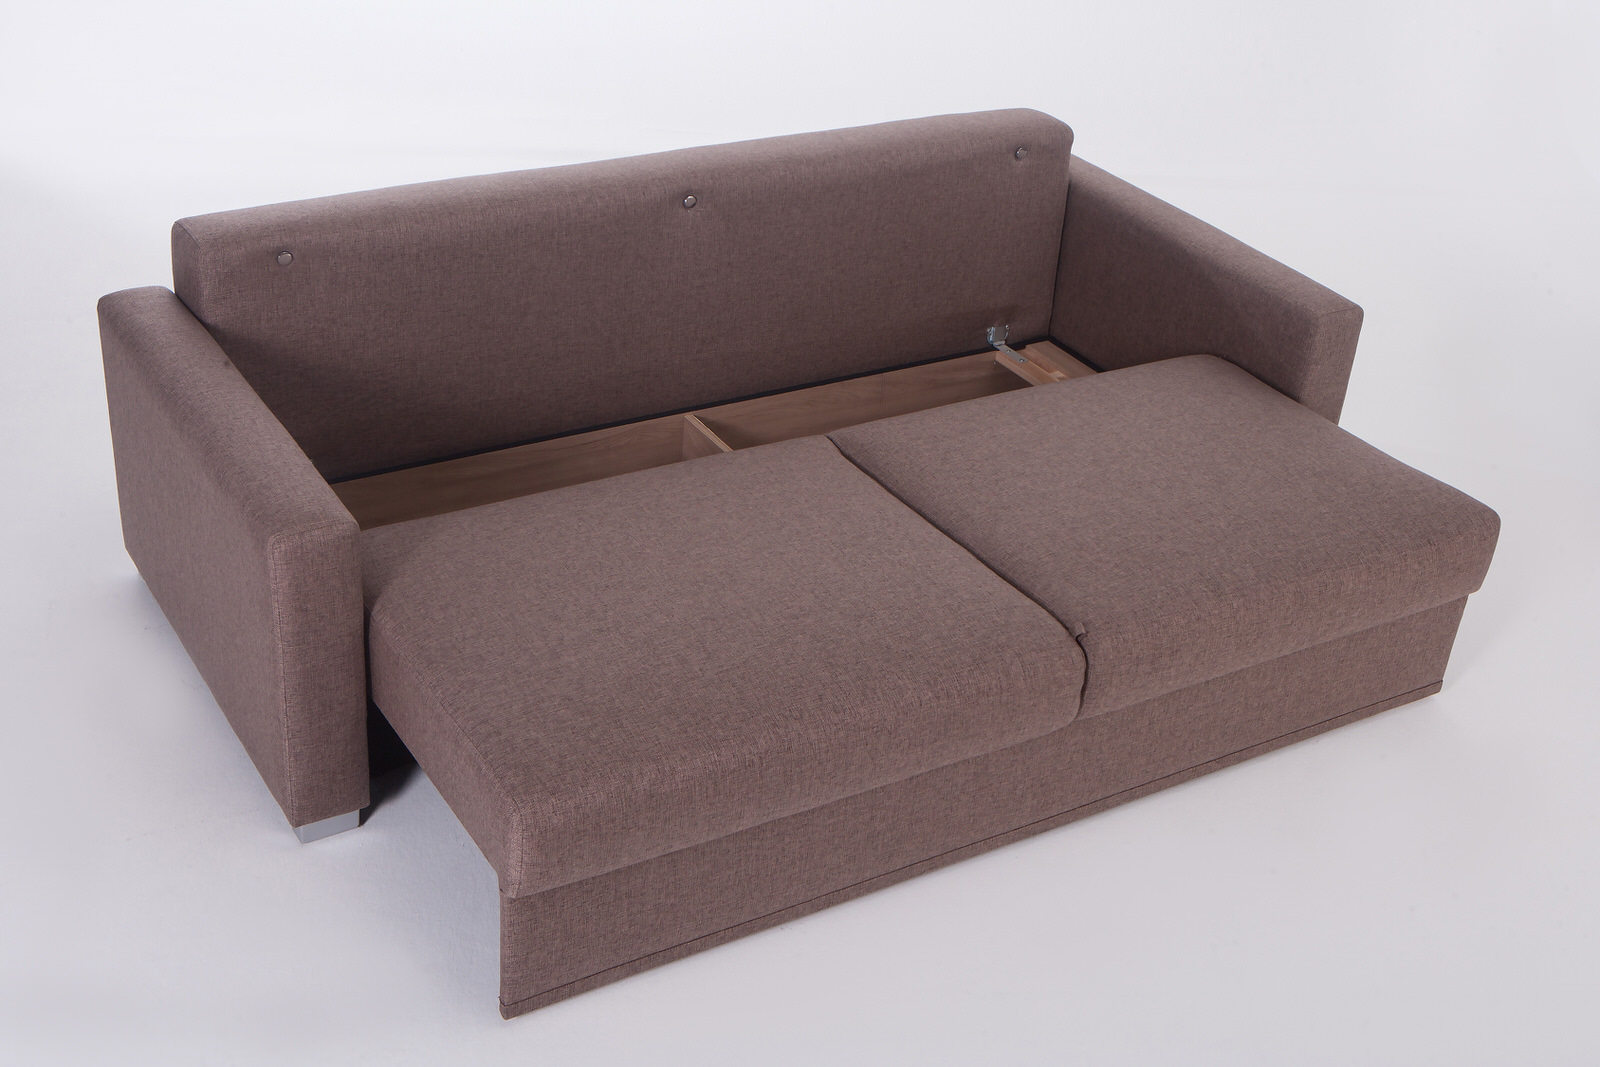 sofa convertible bed felix diego light brown convertible sofa bed by sunset TOROQPV